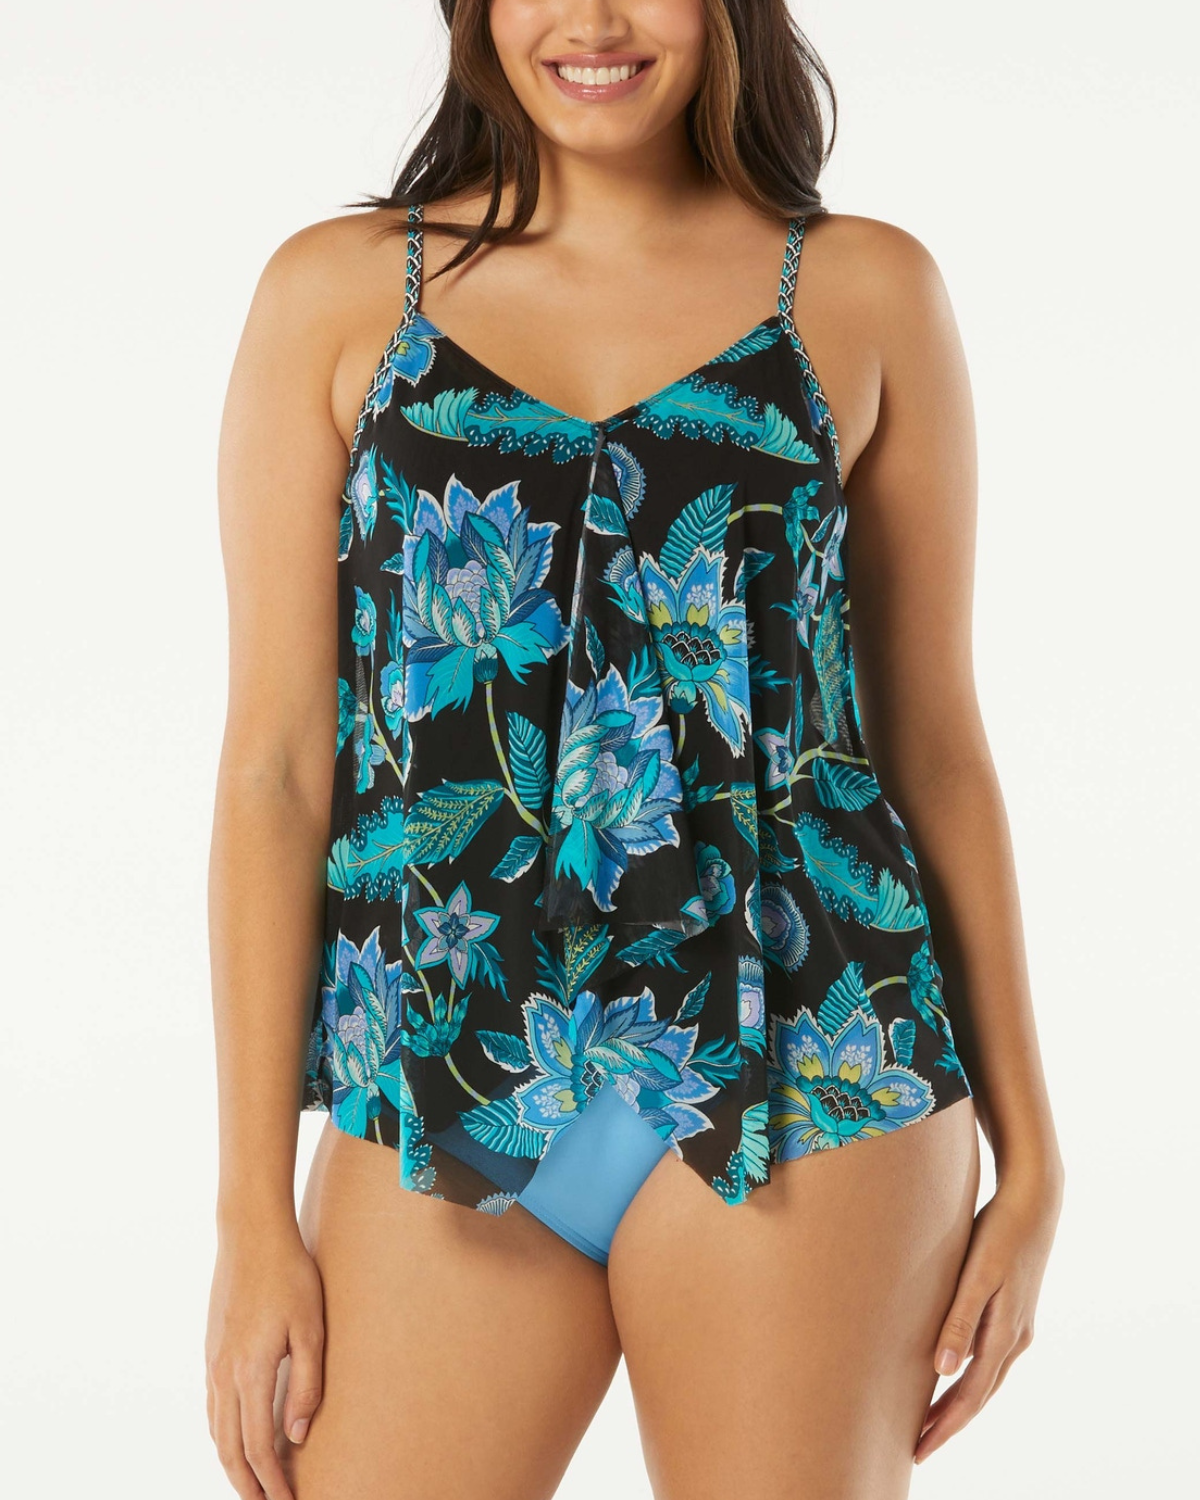 Model wearing a mesh layer tankini top in black with green and blue floral print